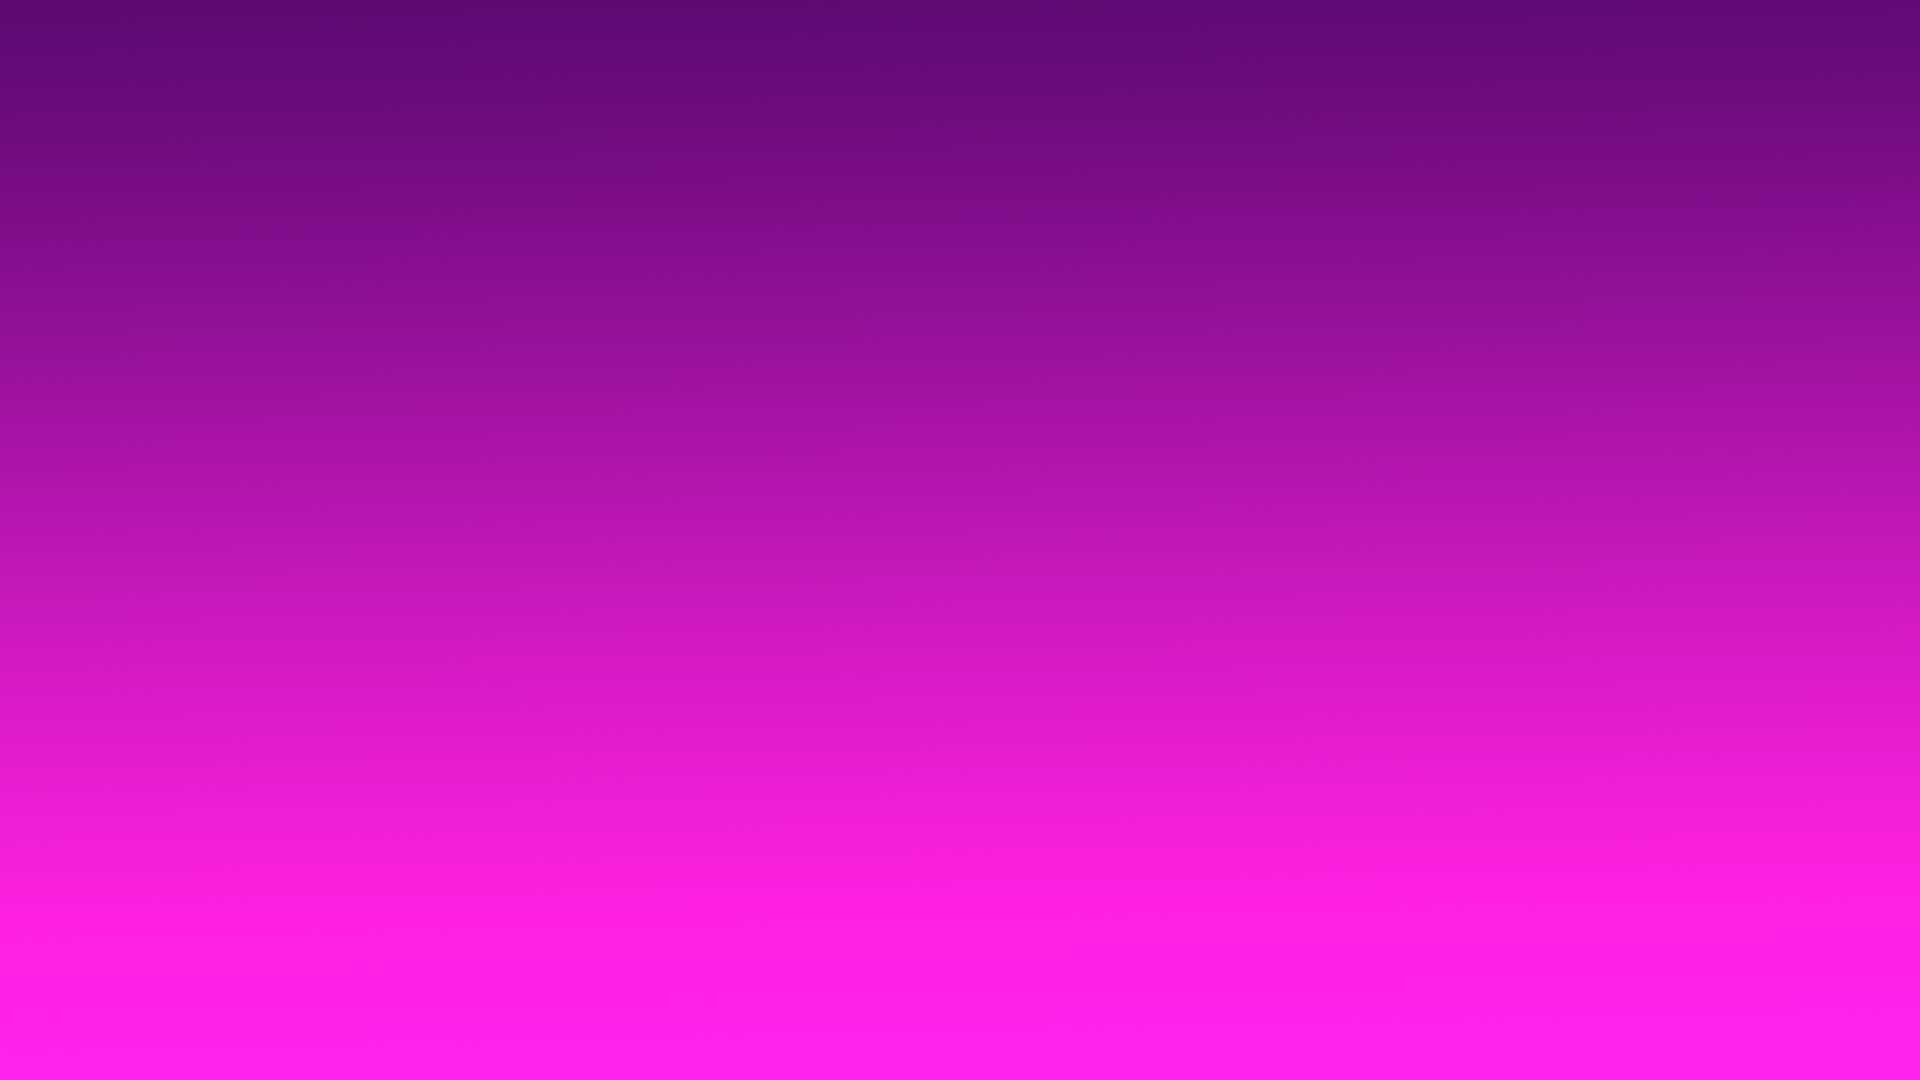 Purple And Pink Wallpaper 74 Pictures